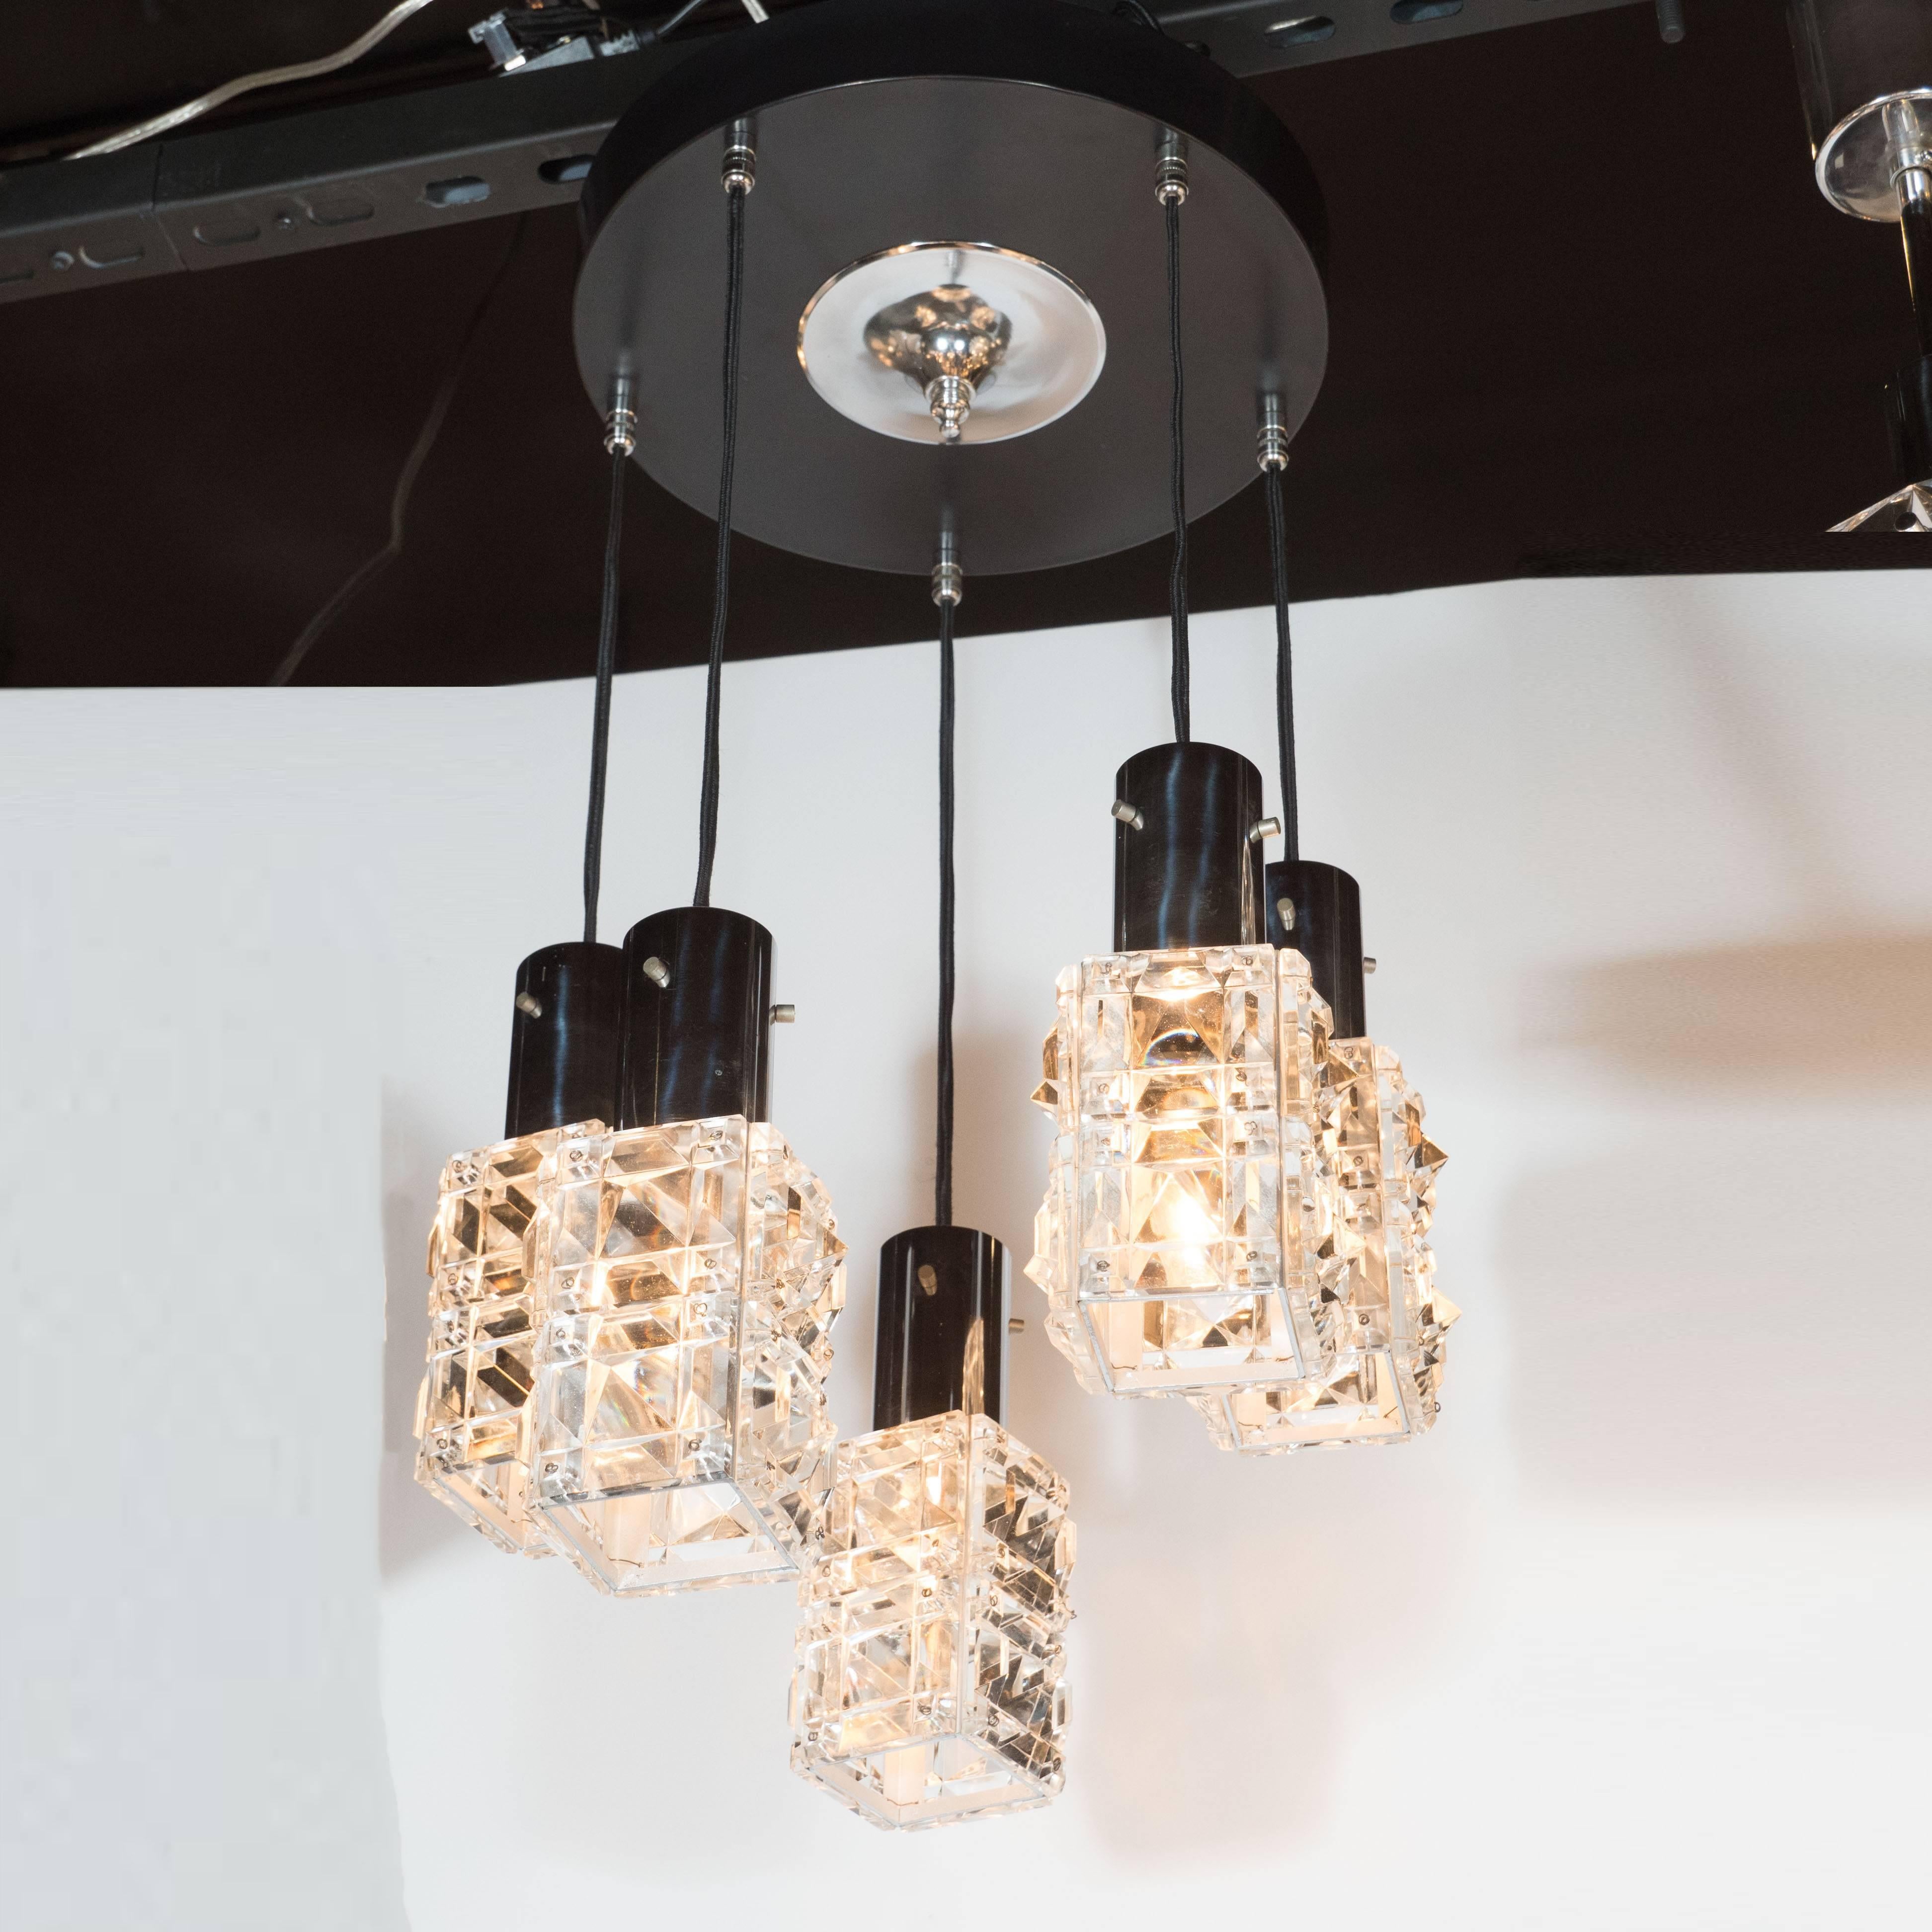 This quintessentially Mid-Century Modern fixture was realized by the esteemed producer J.T. Kalmar- one of the most illustrious names in European 20th century lighting, circa 1960. It features five translucent cut crystal shades etched with raised